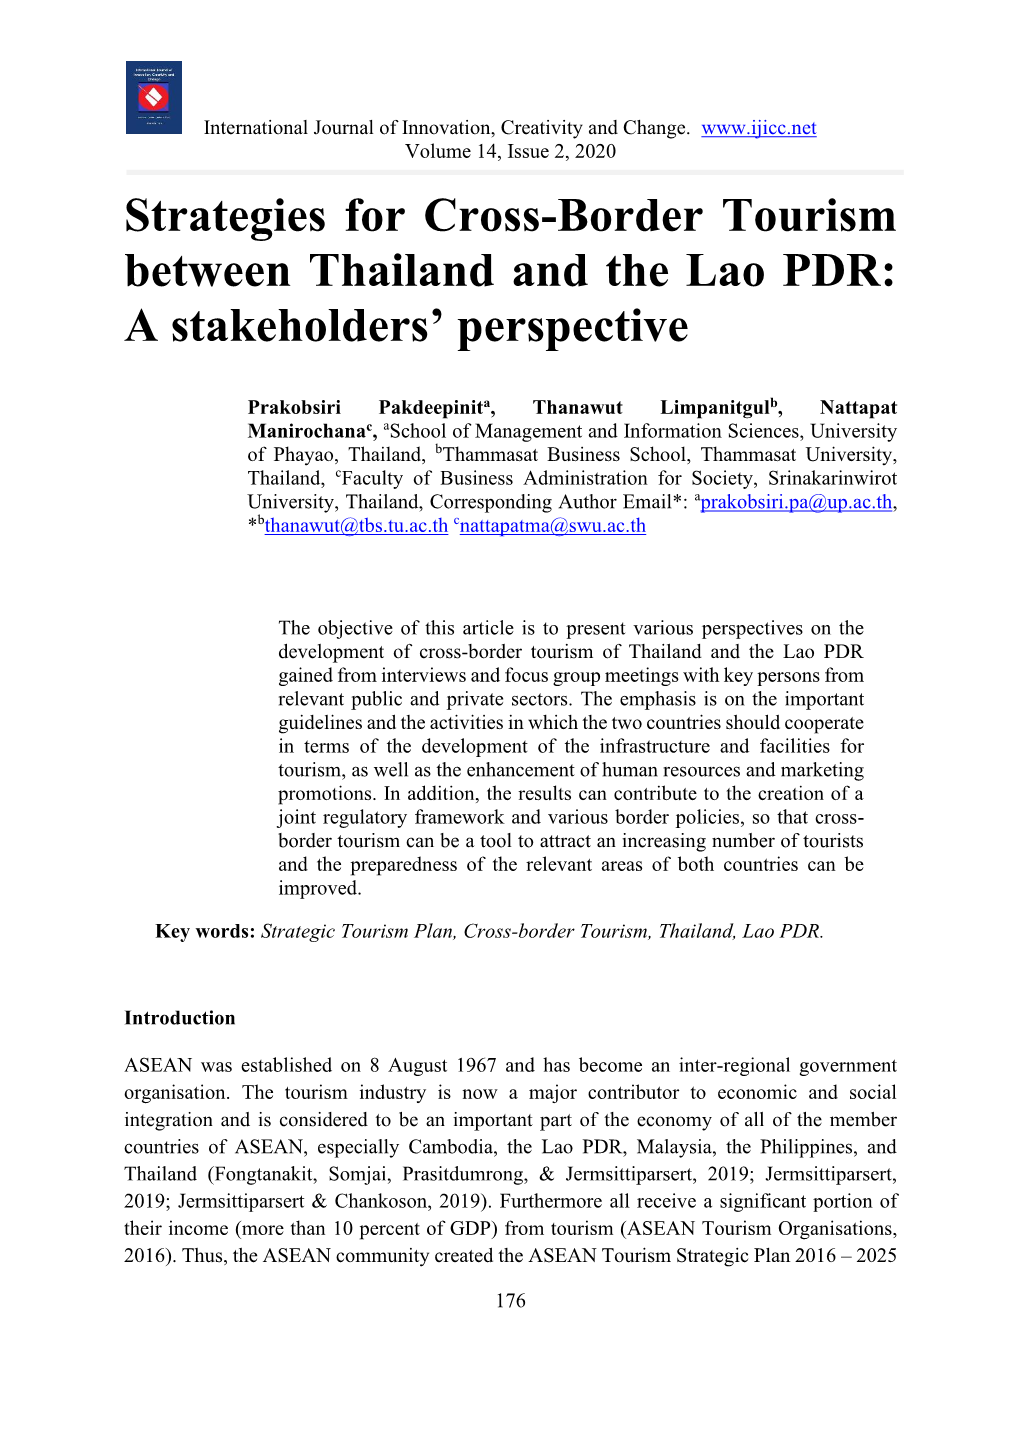 Strategies for Cross-Border Tourism Between Thailand and the Lao PDR: a Stakeholders’ Perspective